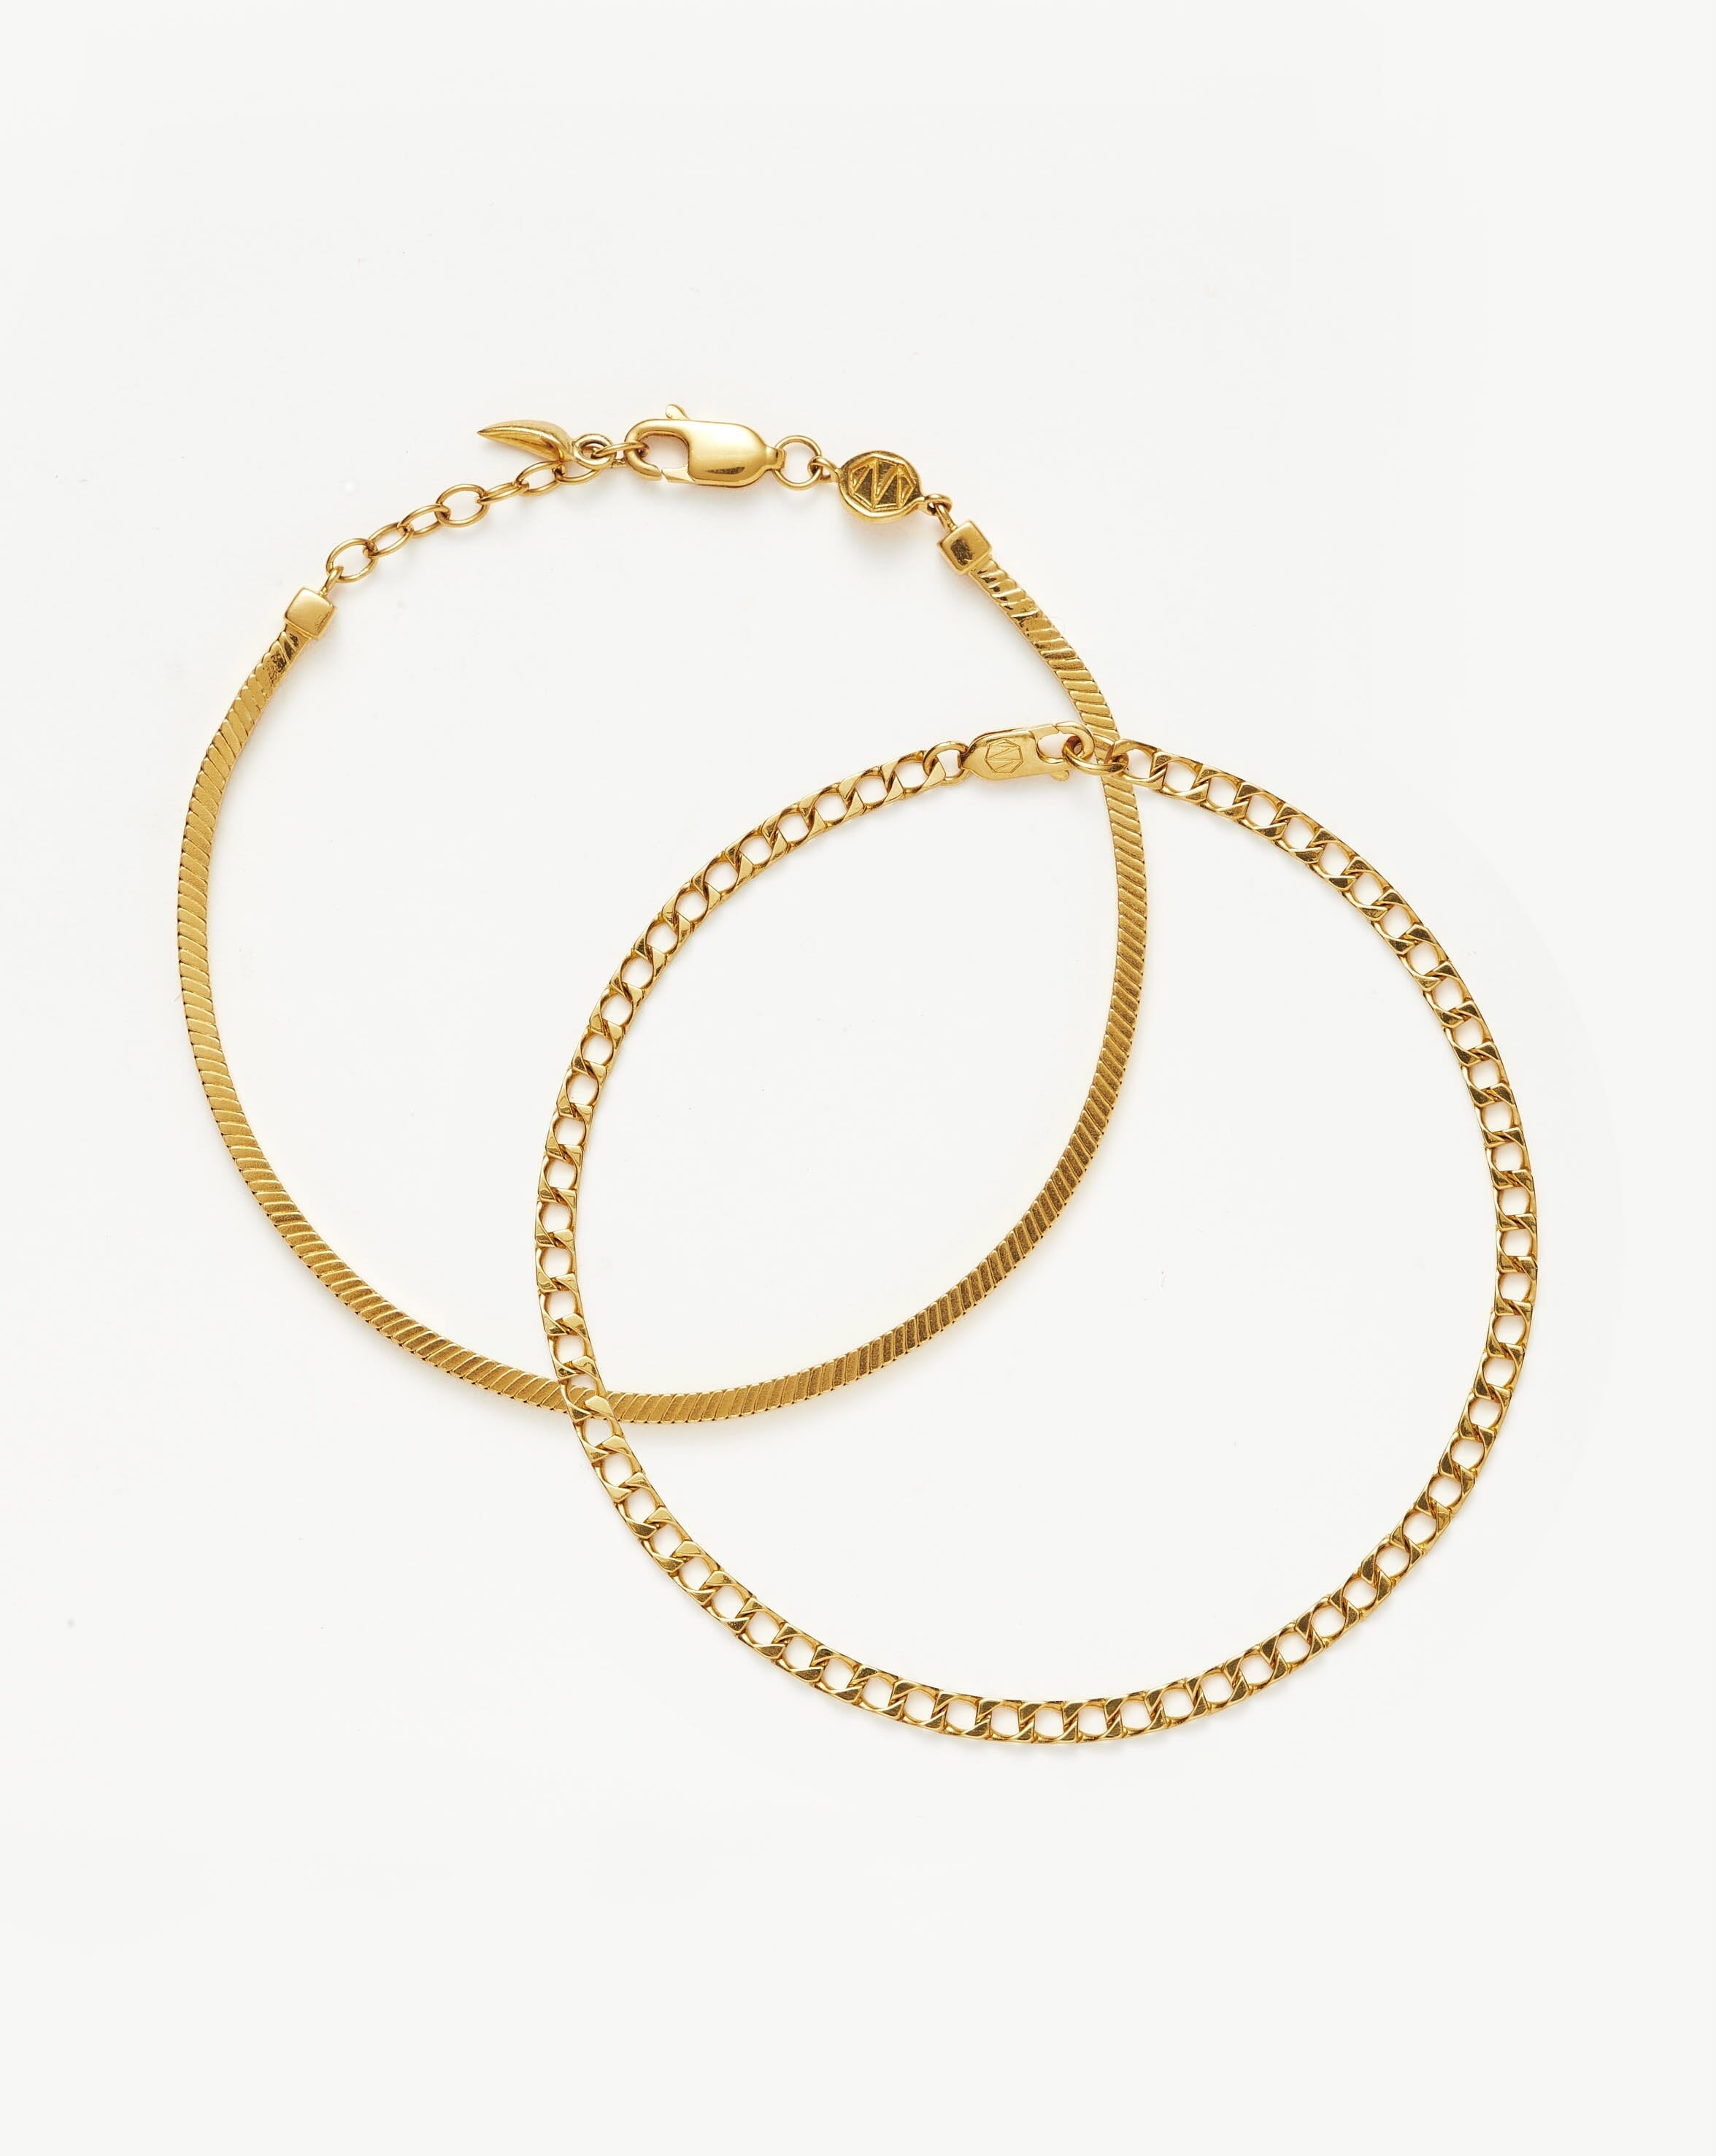 Iconic Lucy Williams Chain Bracelet Set Layering Sets Missoma 18ct Gold Plated Vermeil 